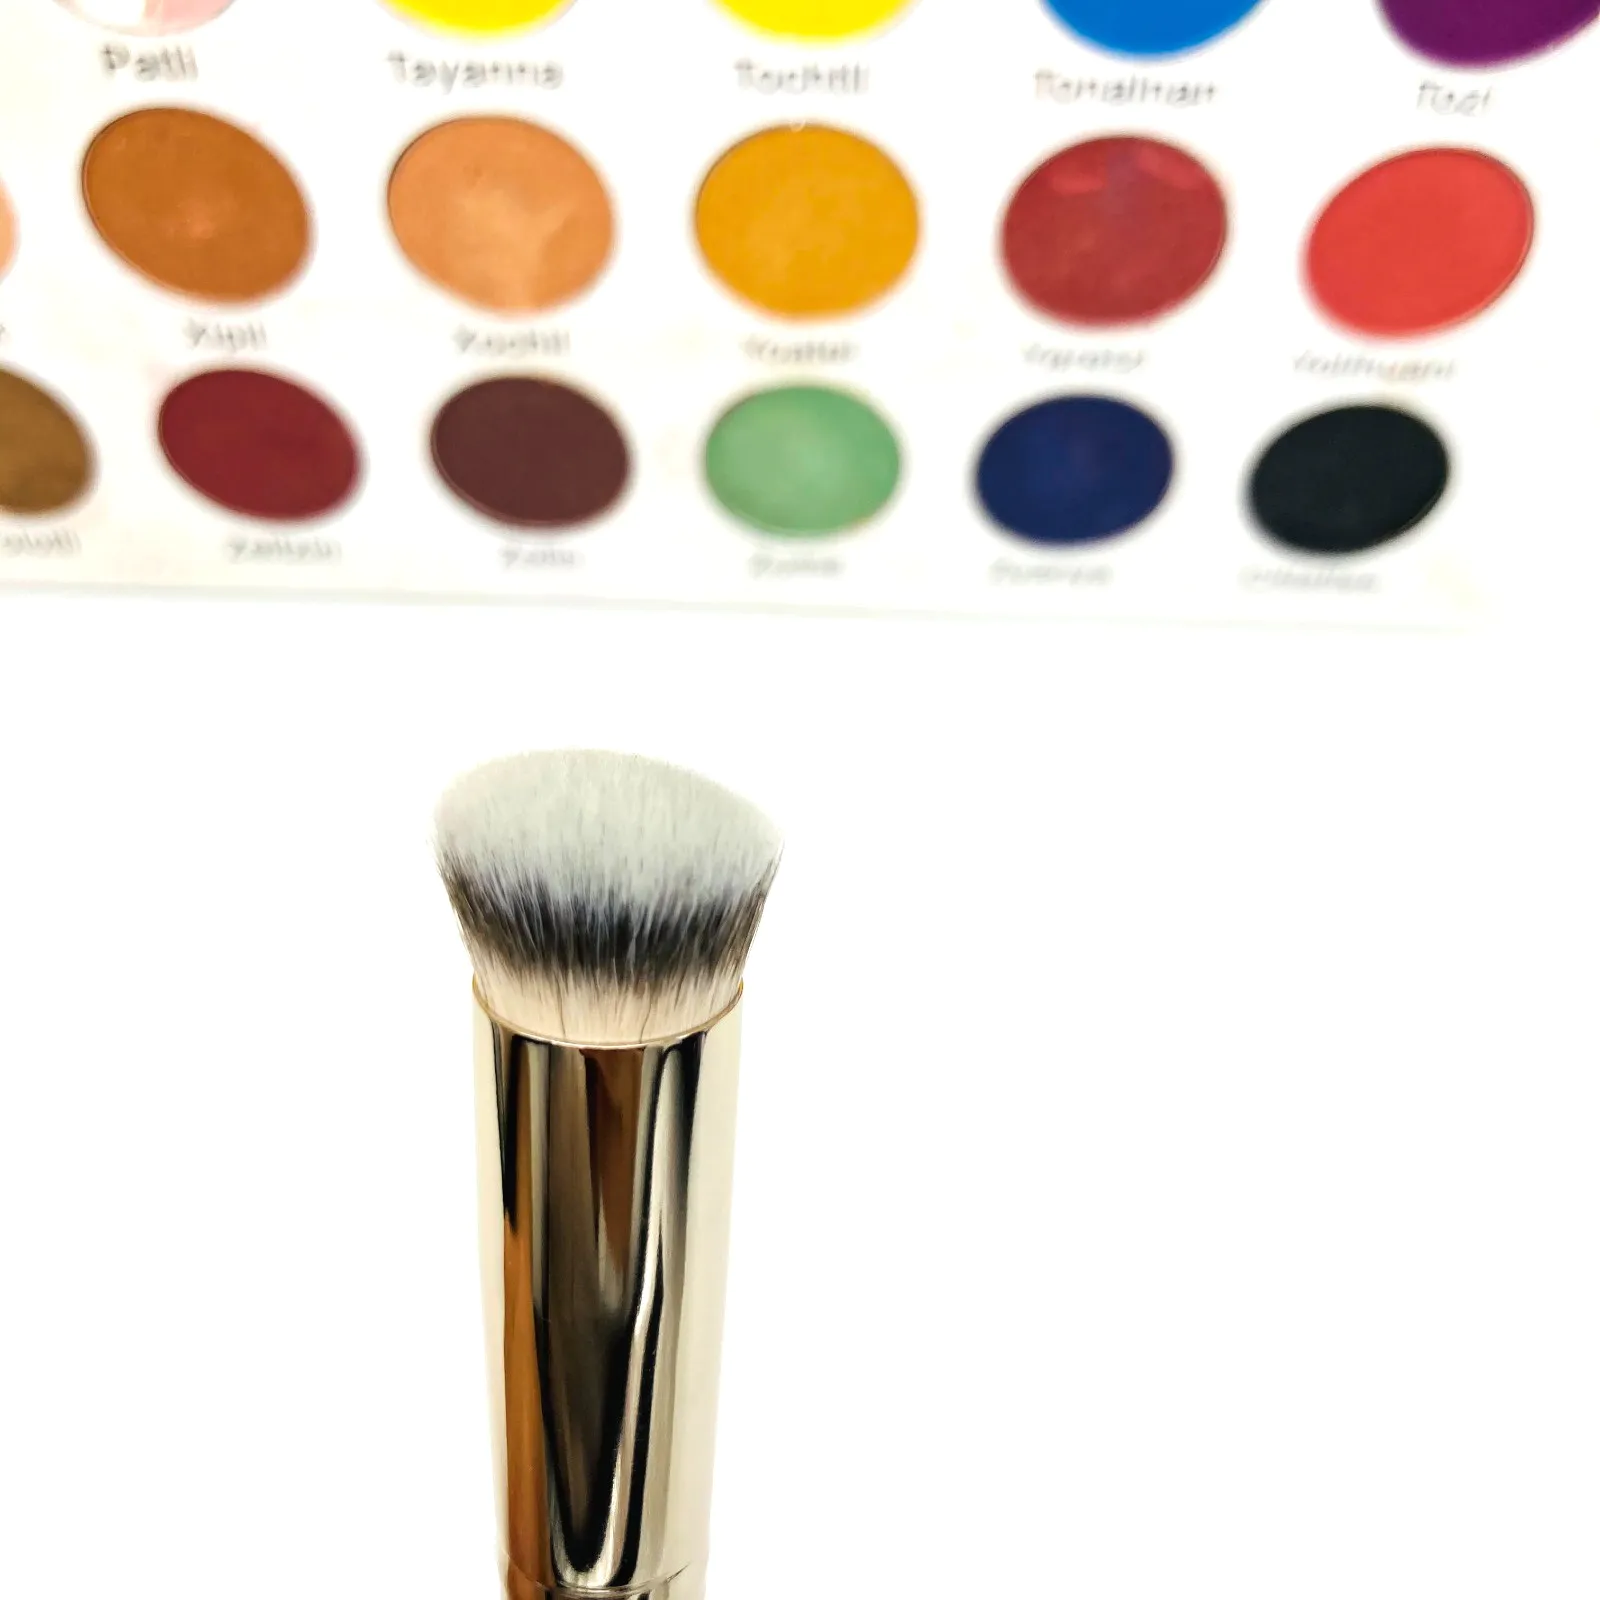 Suprabeauty beauty cosmetics brushes best manufacturer for beauty